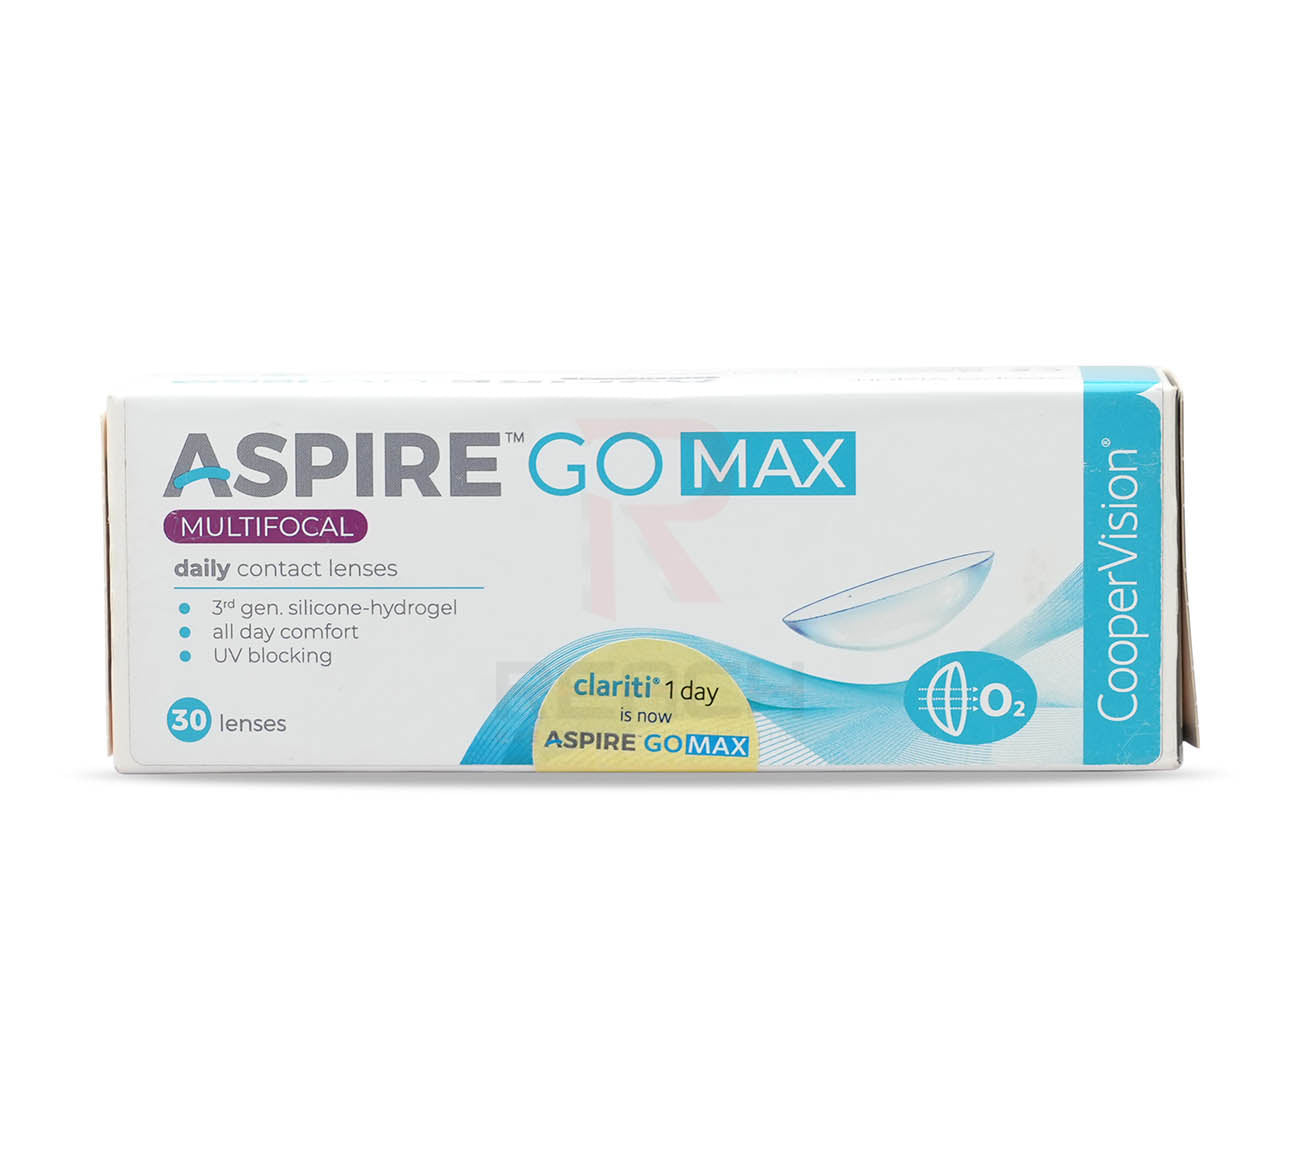 ASPIRE GO MAX DAILY DISPOSABLE MULTIFOCAL CONTACT LENSES  (30 LENS PACK )